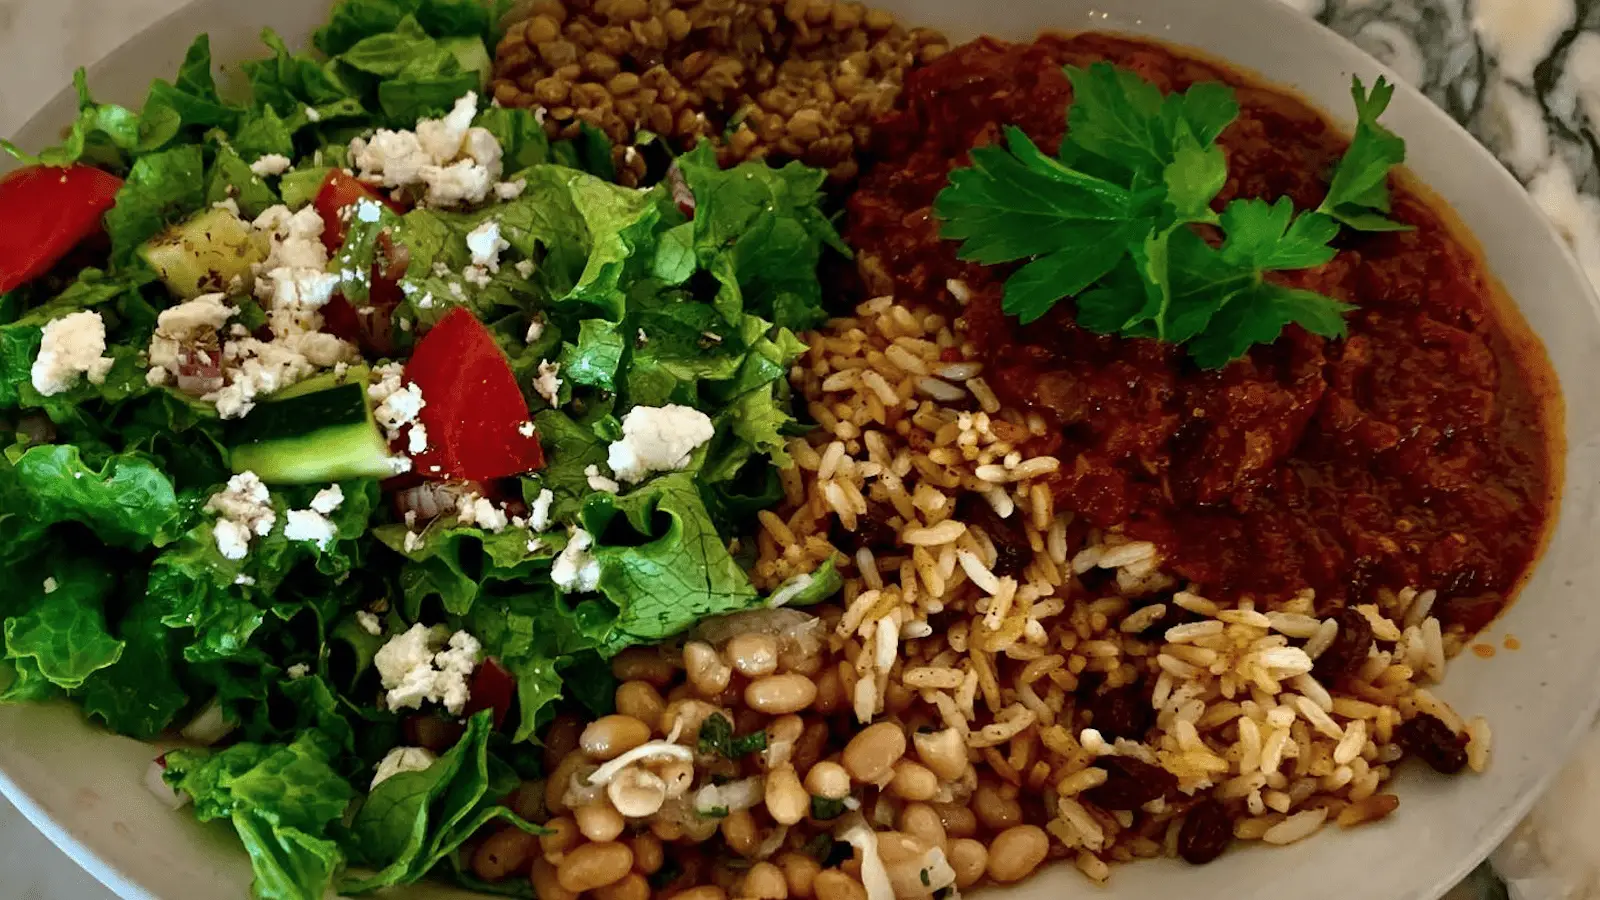 A plate of food, perfect for the best lunch on the Monterey Peninsula, featuring a mixed green salad with cherry tomatoes and crumbled cheese, a serving of rice mixed with lentils, and a portion of stewed beans garnished with fresh parsley.